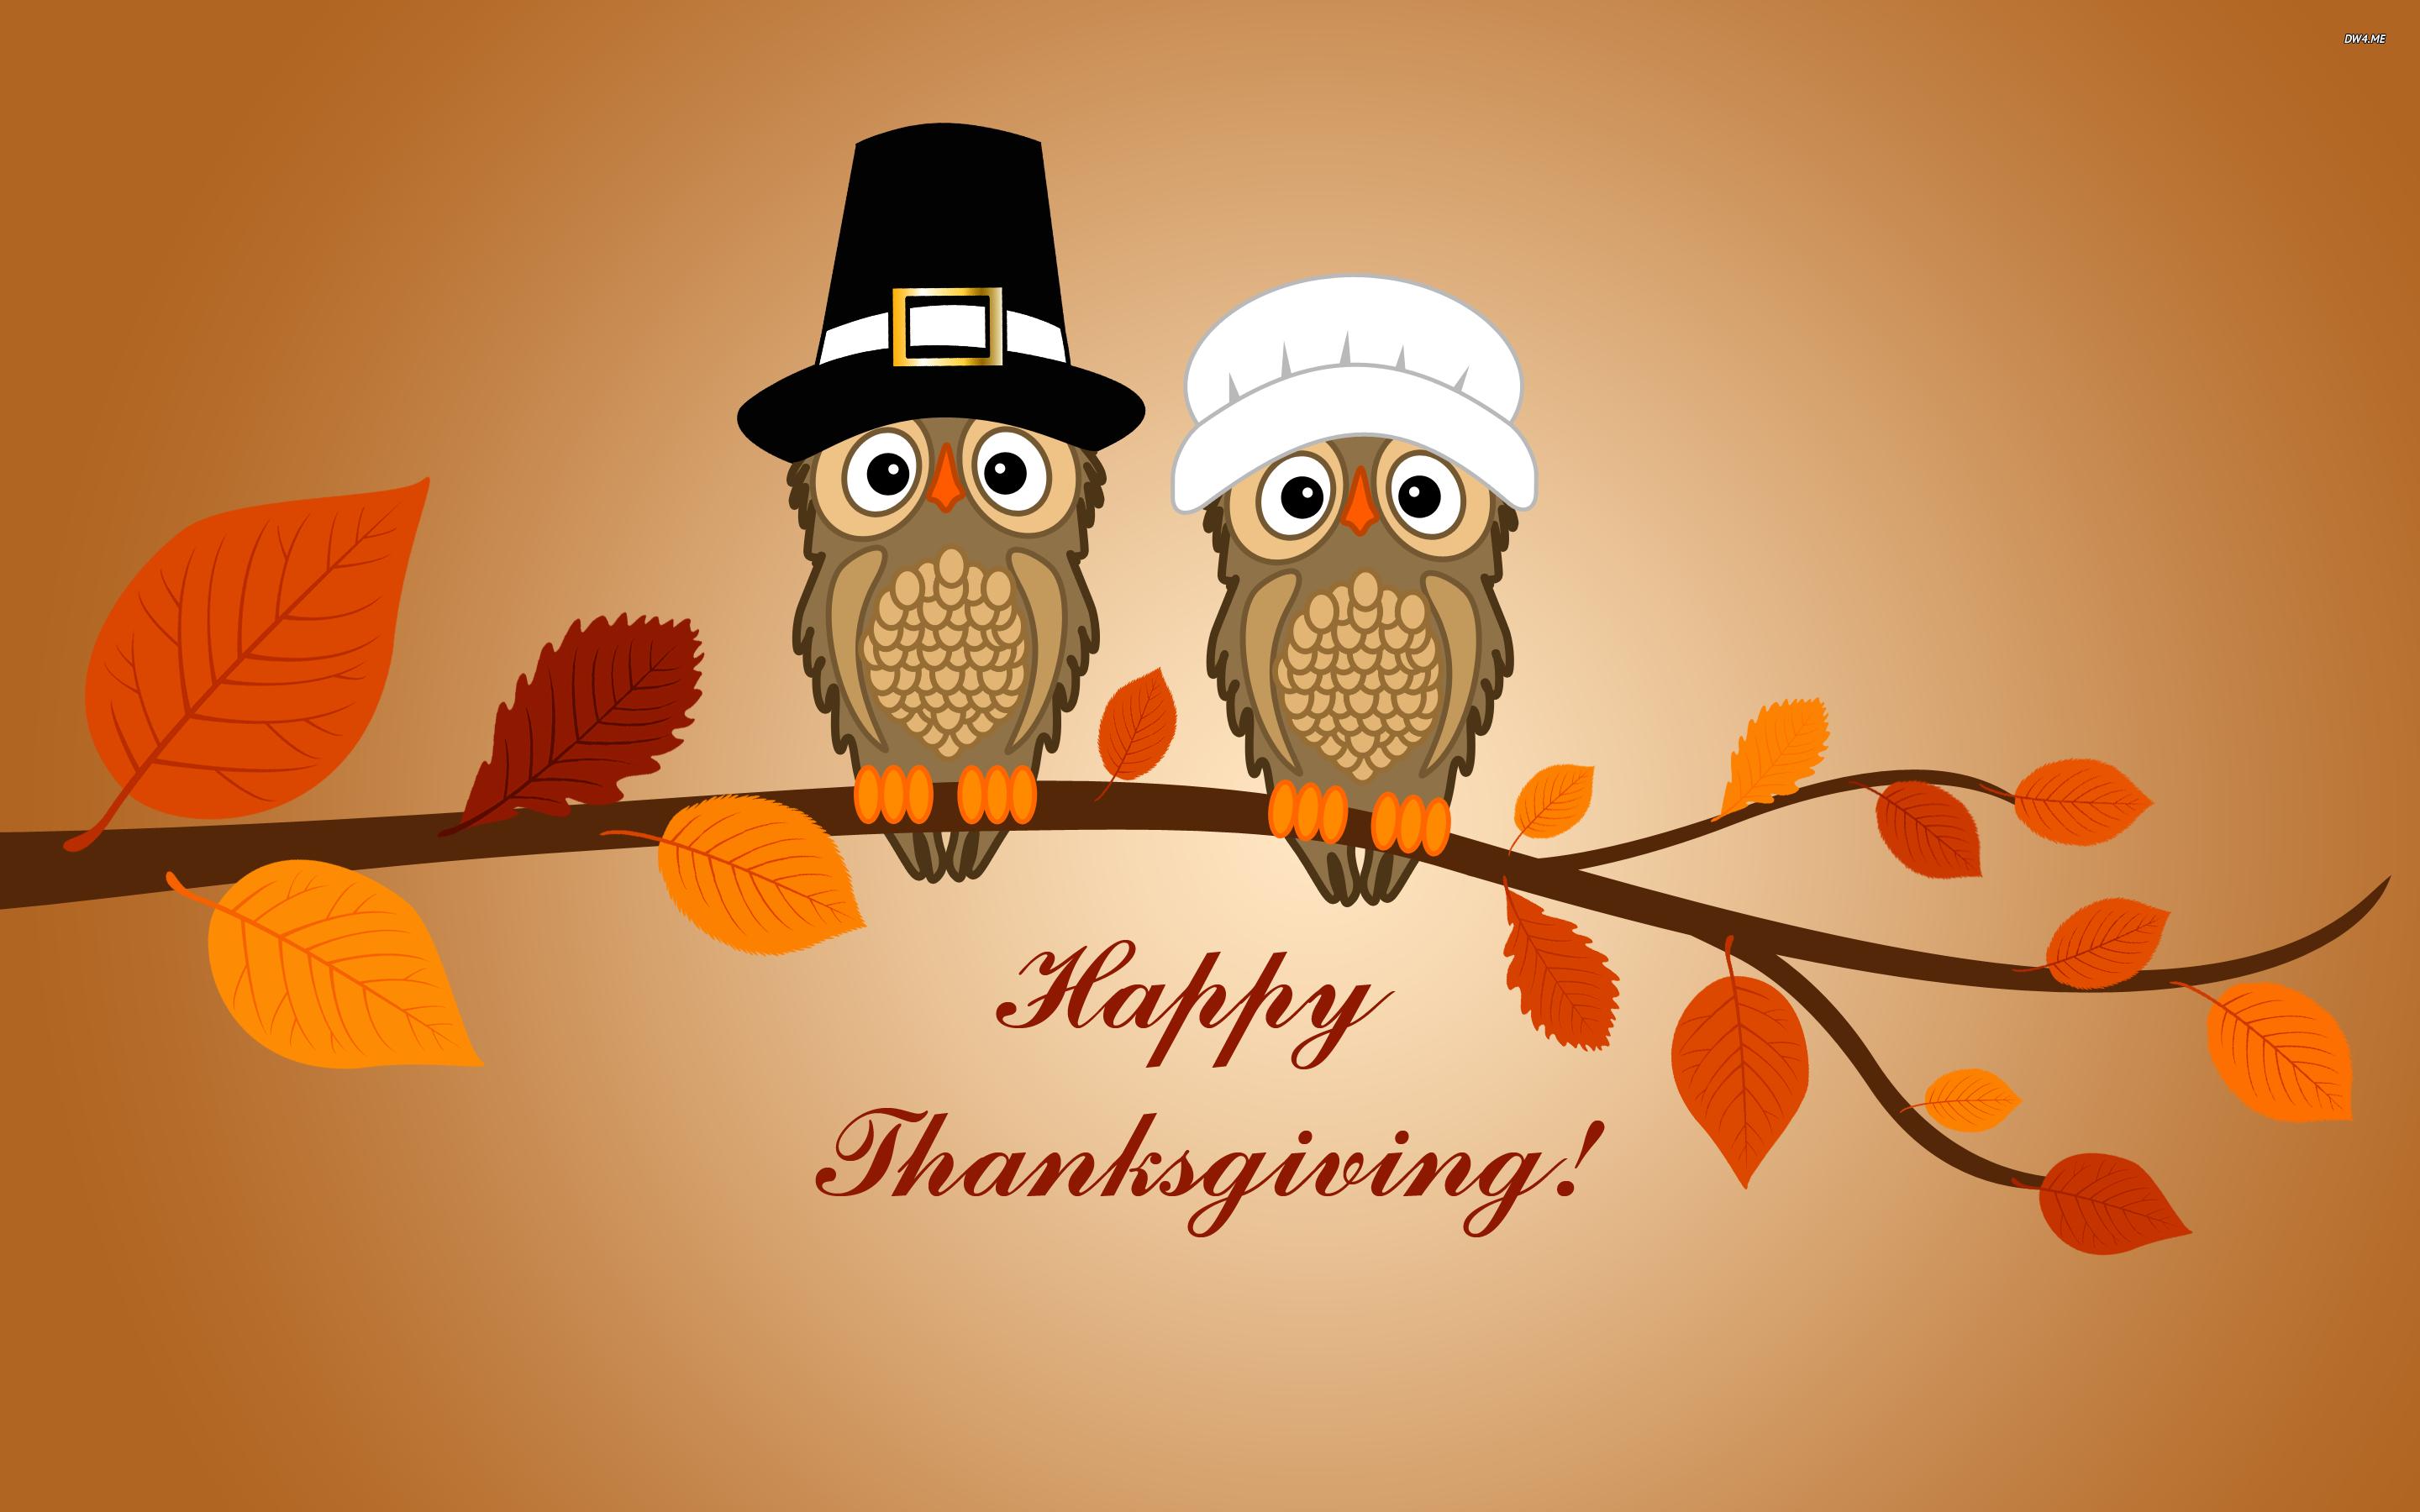 Cute Happy Thanksgiving Wallpaper Quotes Image